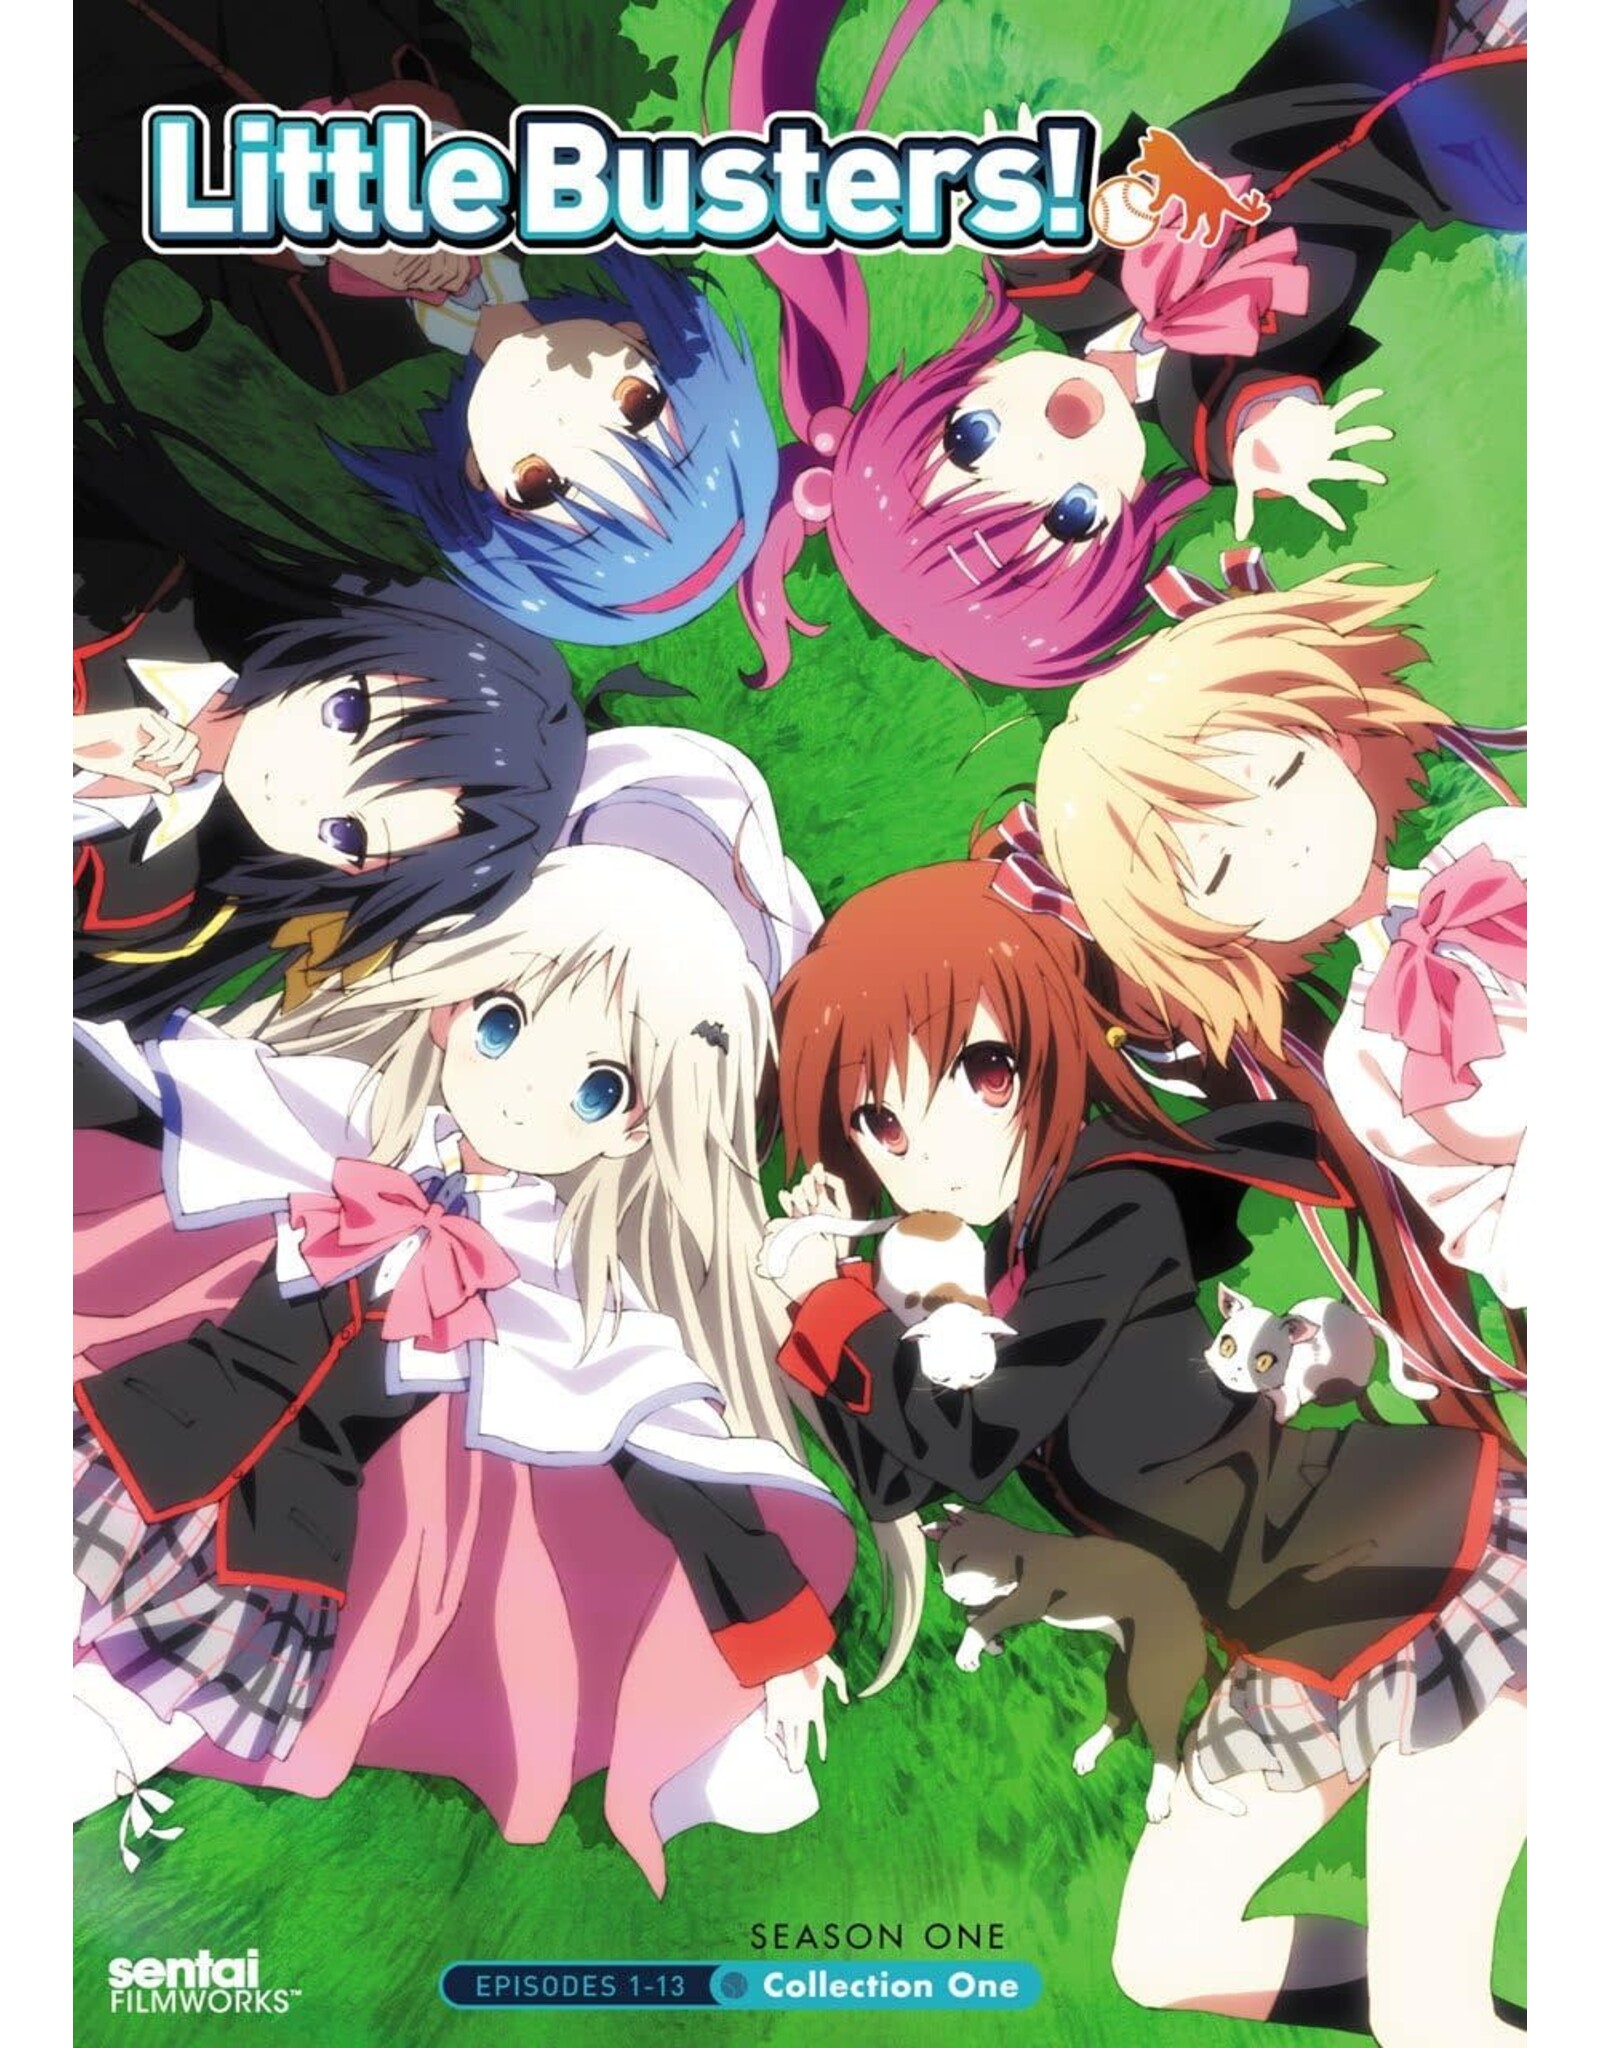 Anime & Animation Little Busters! Season One: Collection One (Brand New)